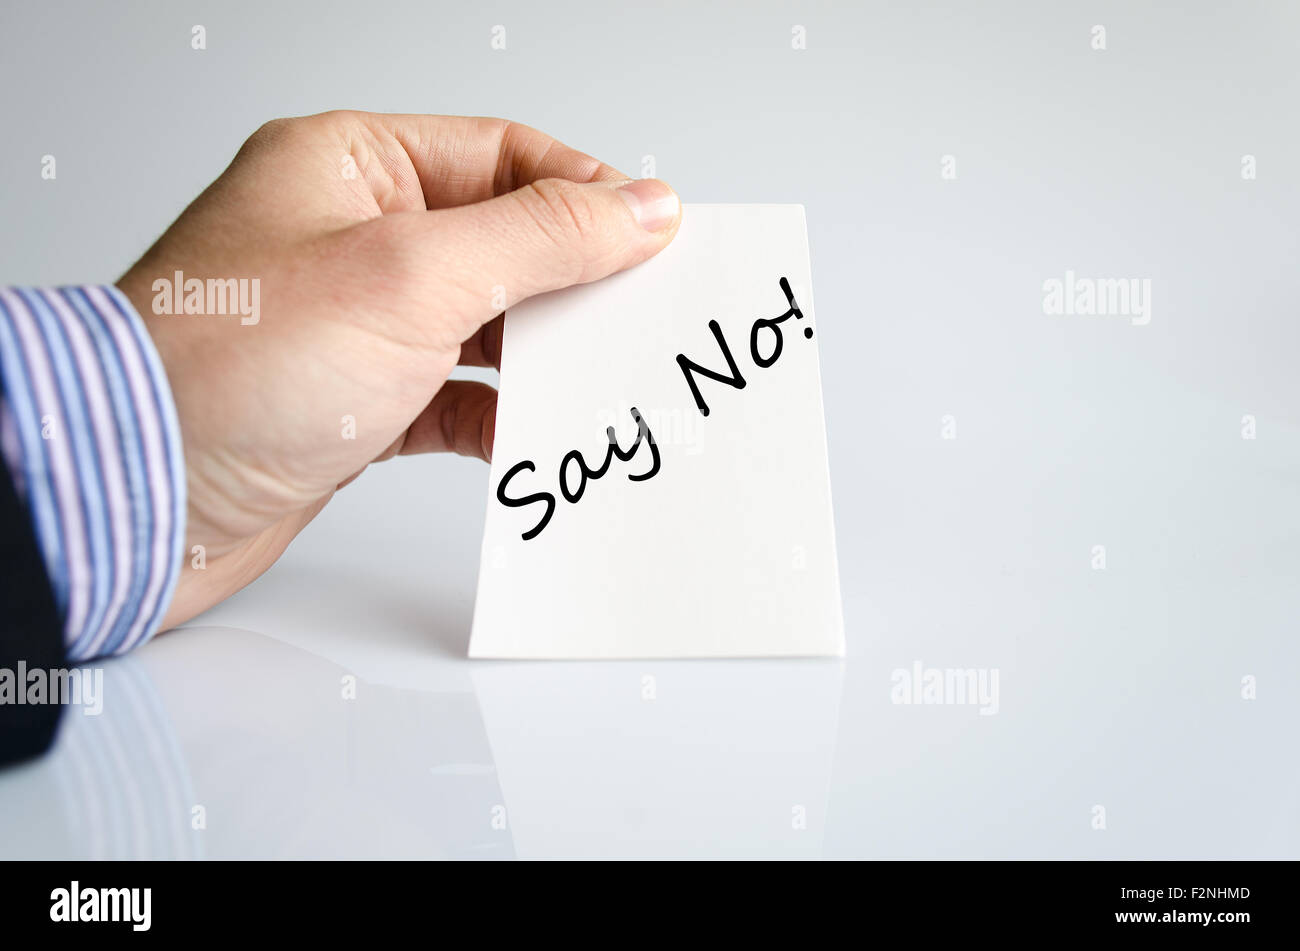 Say no text concept isolated over white background Stock Photo